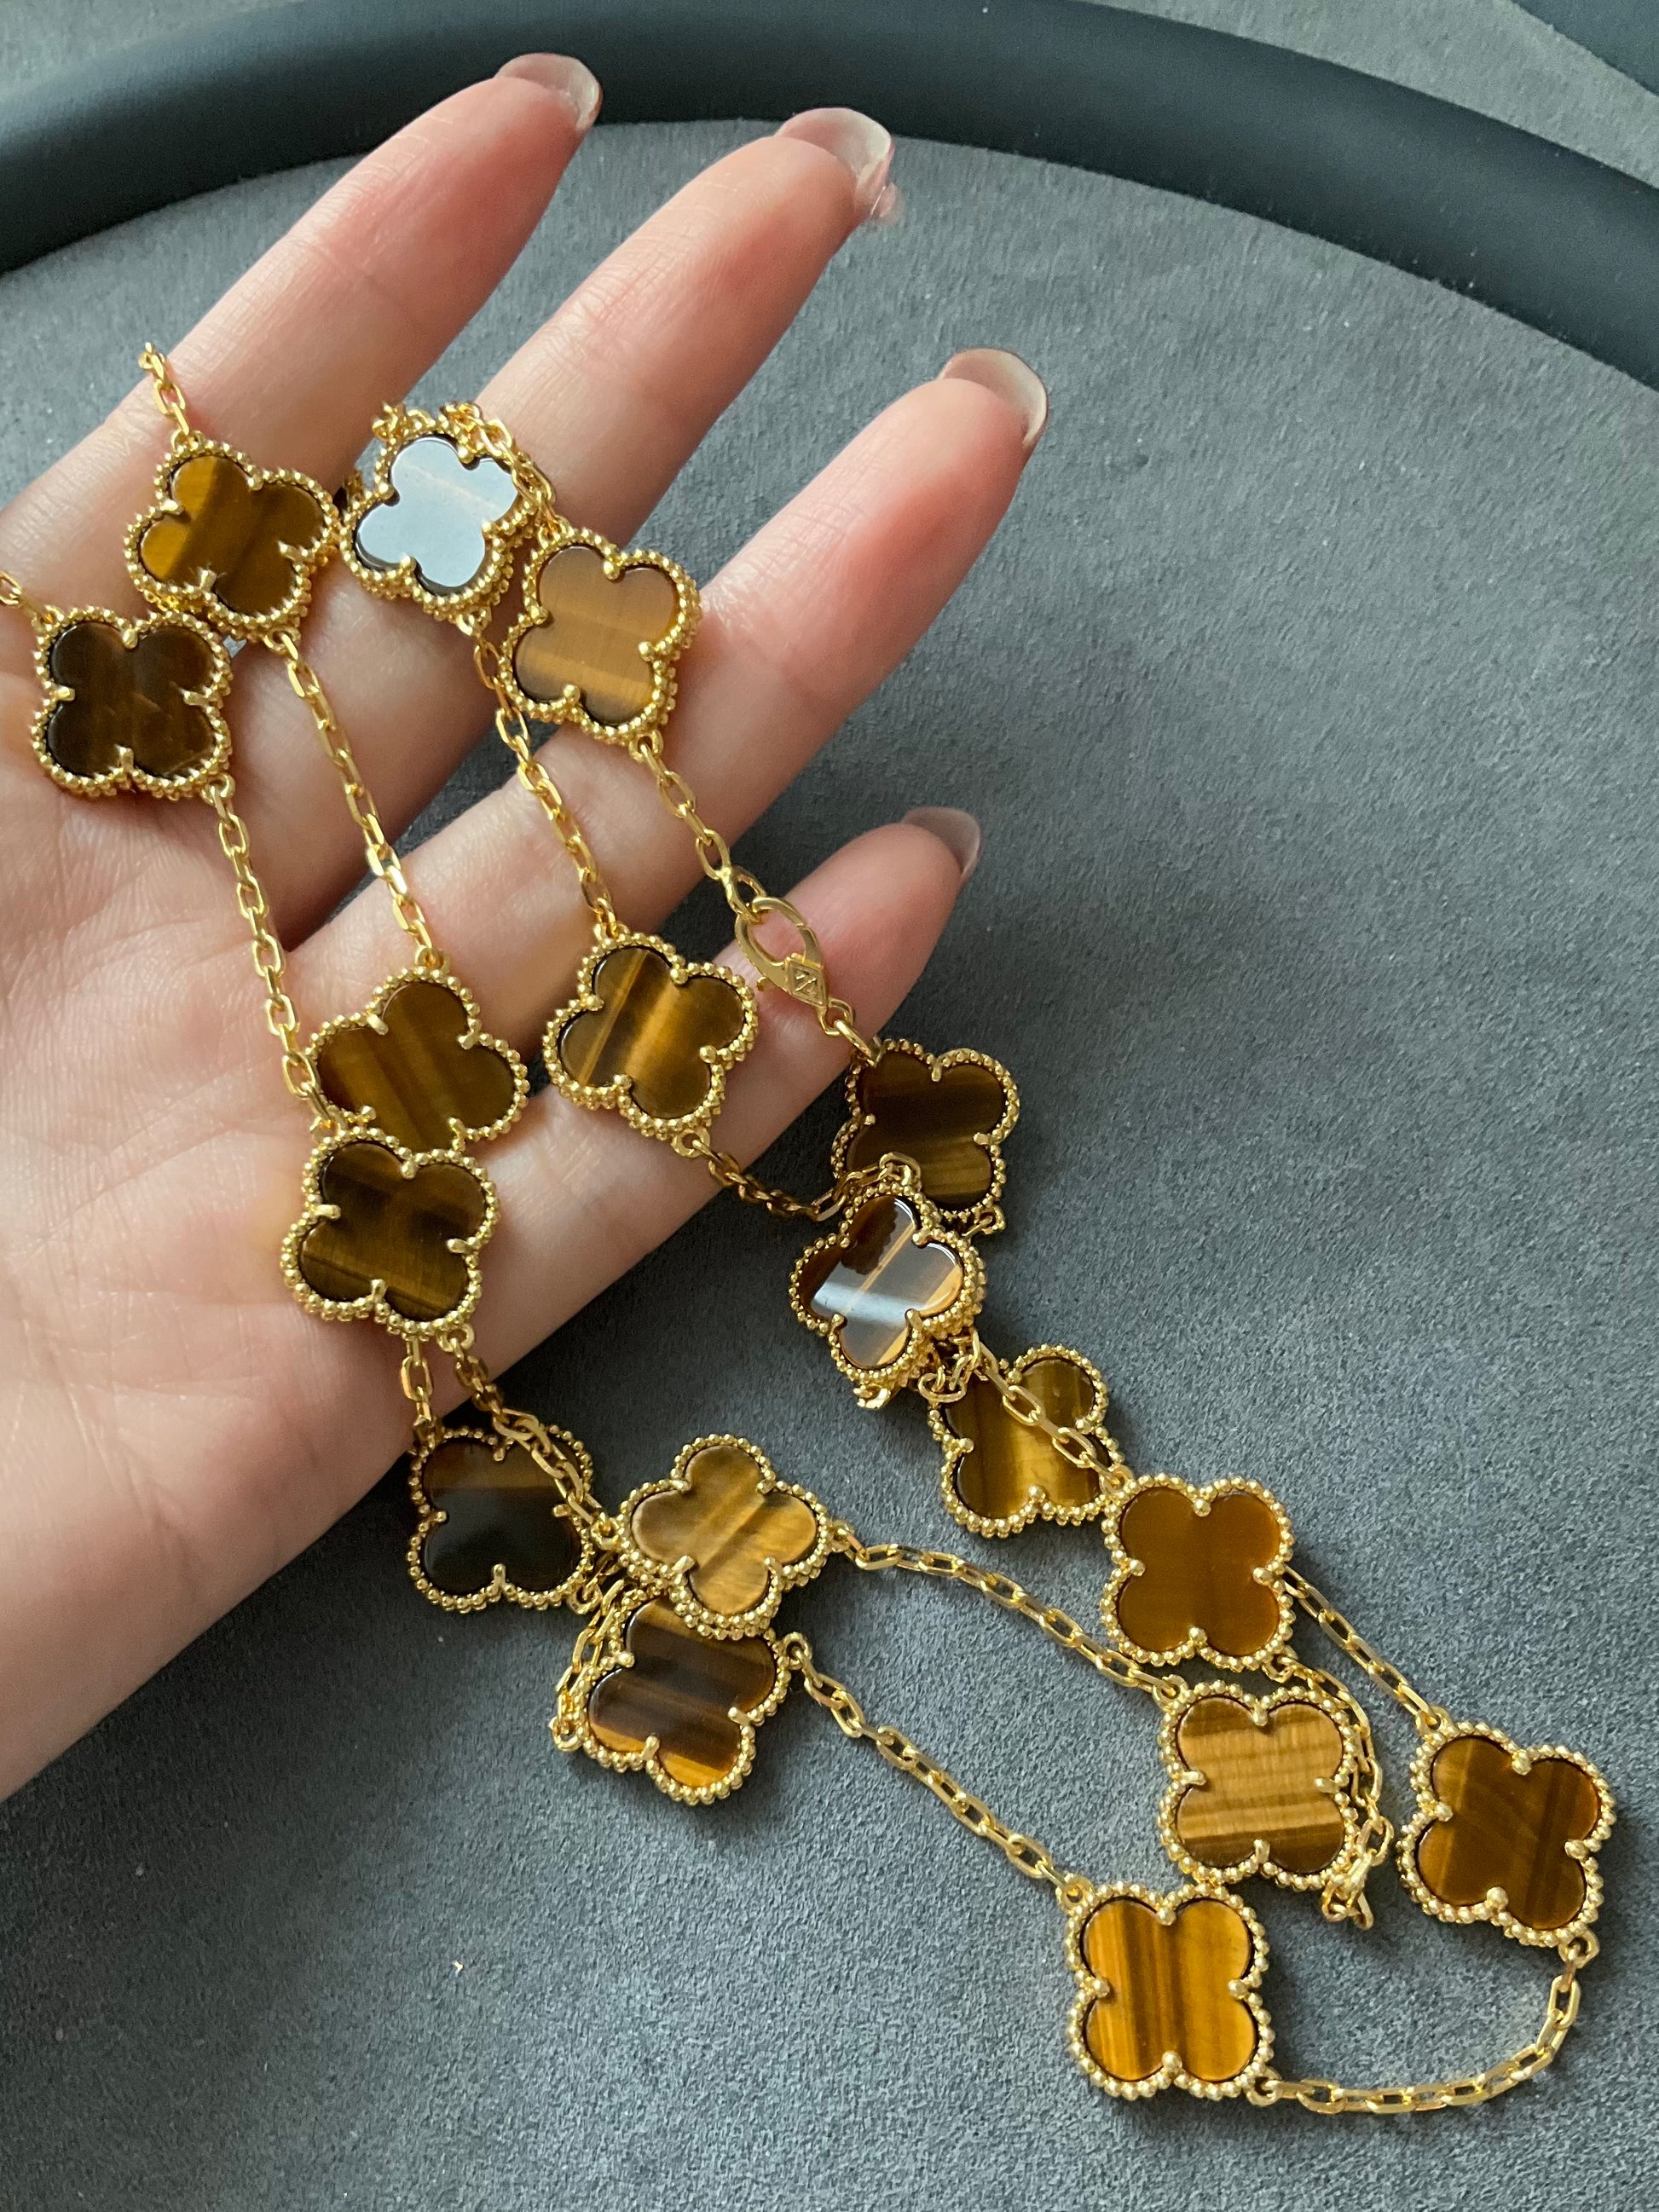 20 motifs Tigers eye Gold Plated Four Leaf Clover Flower Style S 925 Silver Necklace 84cm - ParadiseKissCo